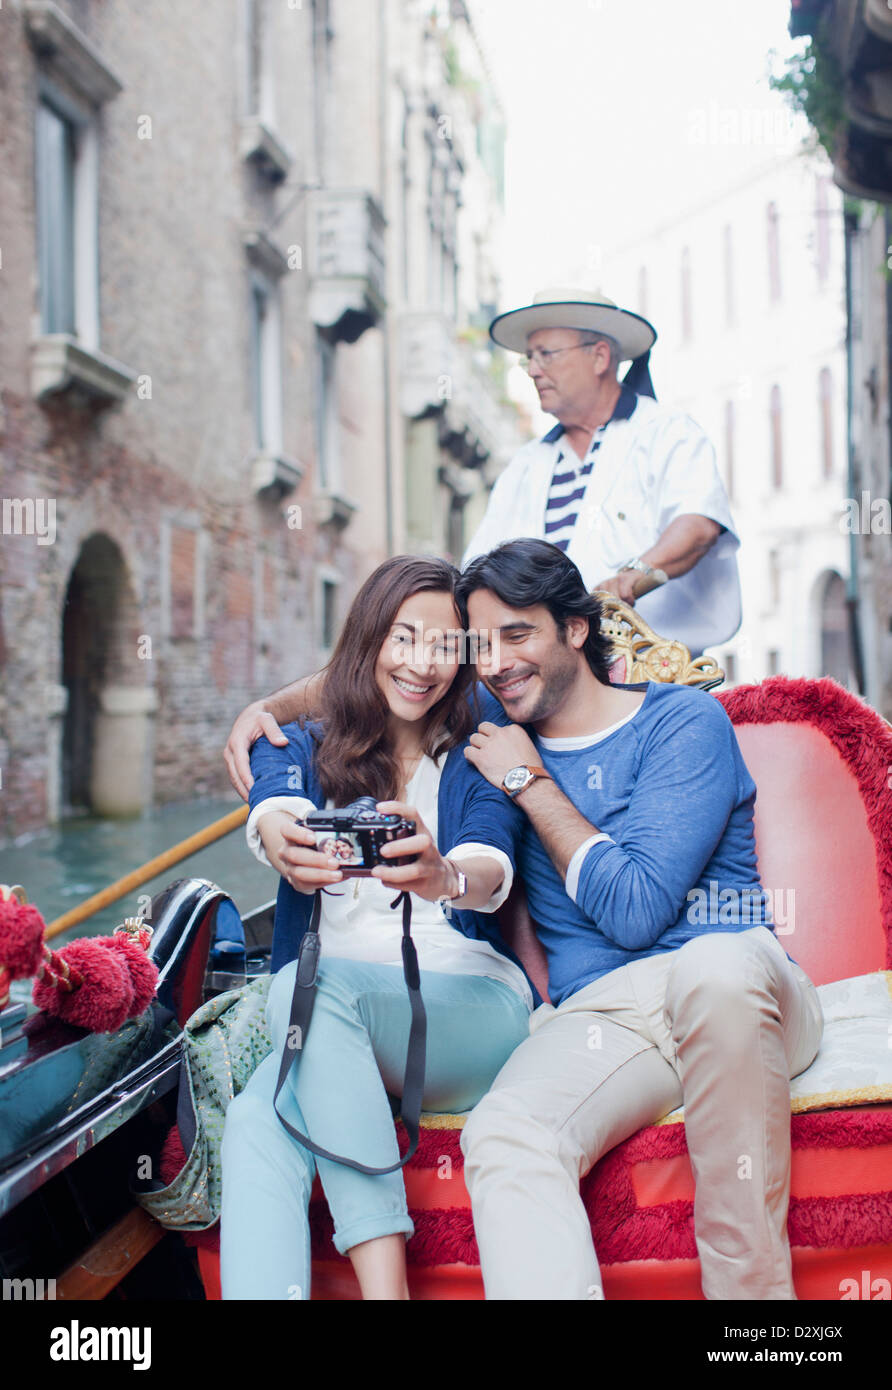 Smiling couple taking self-portrait with digital camera in gondola on canal in Venice Stock Photo